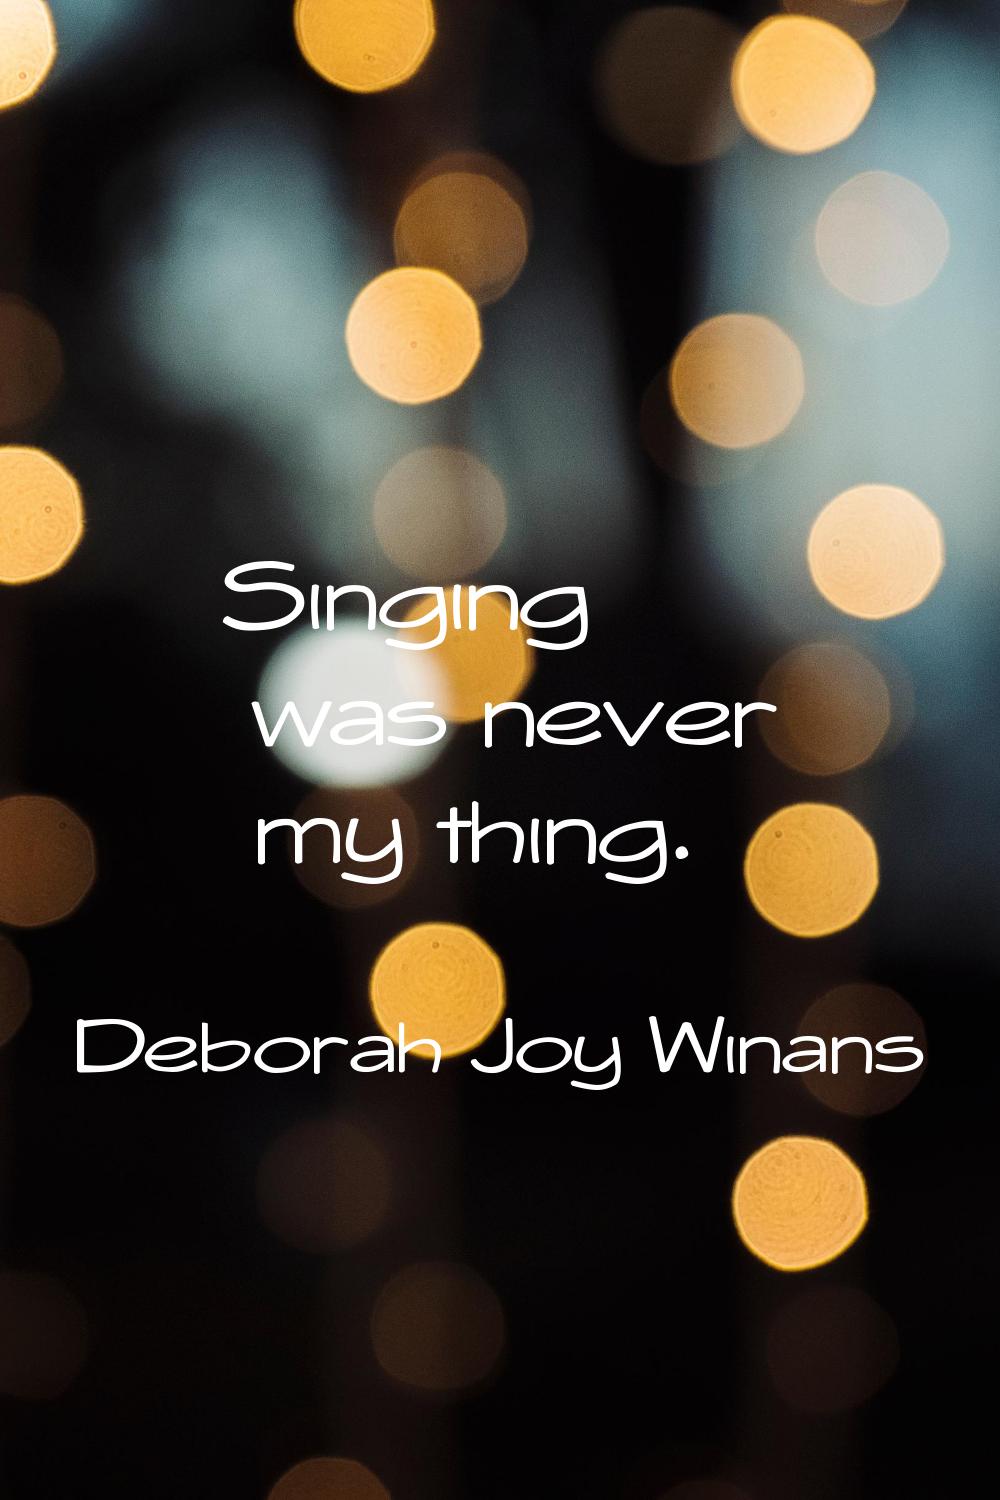 Singing was never my thing.